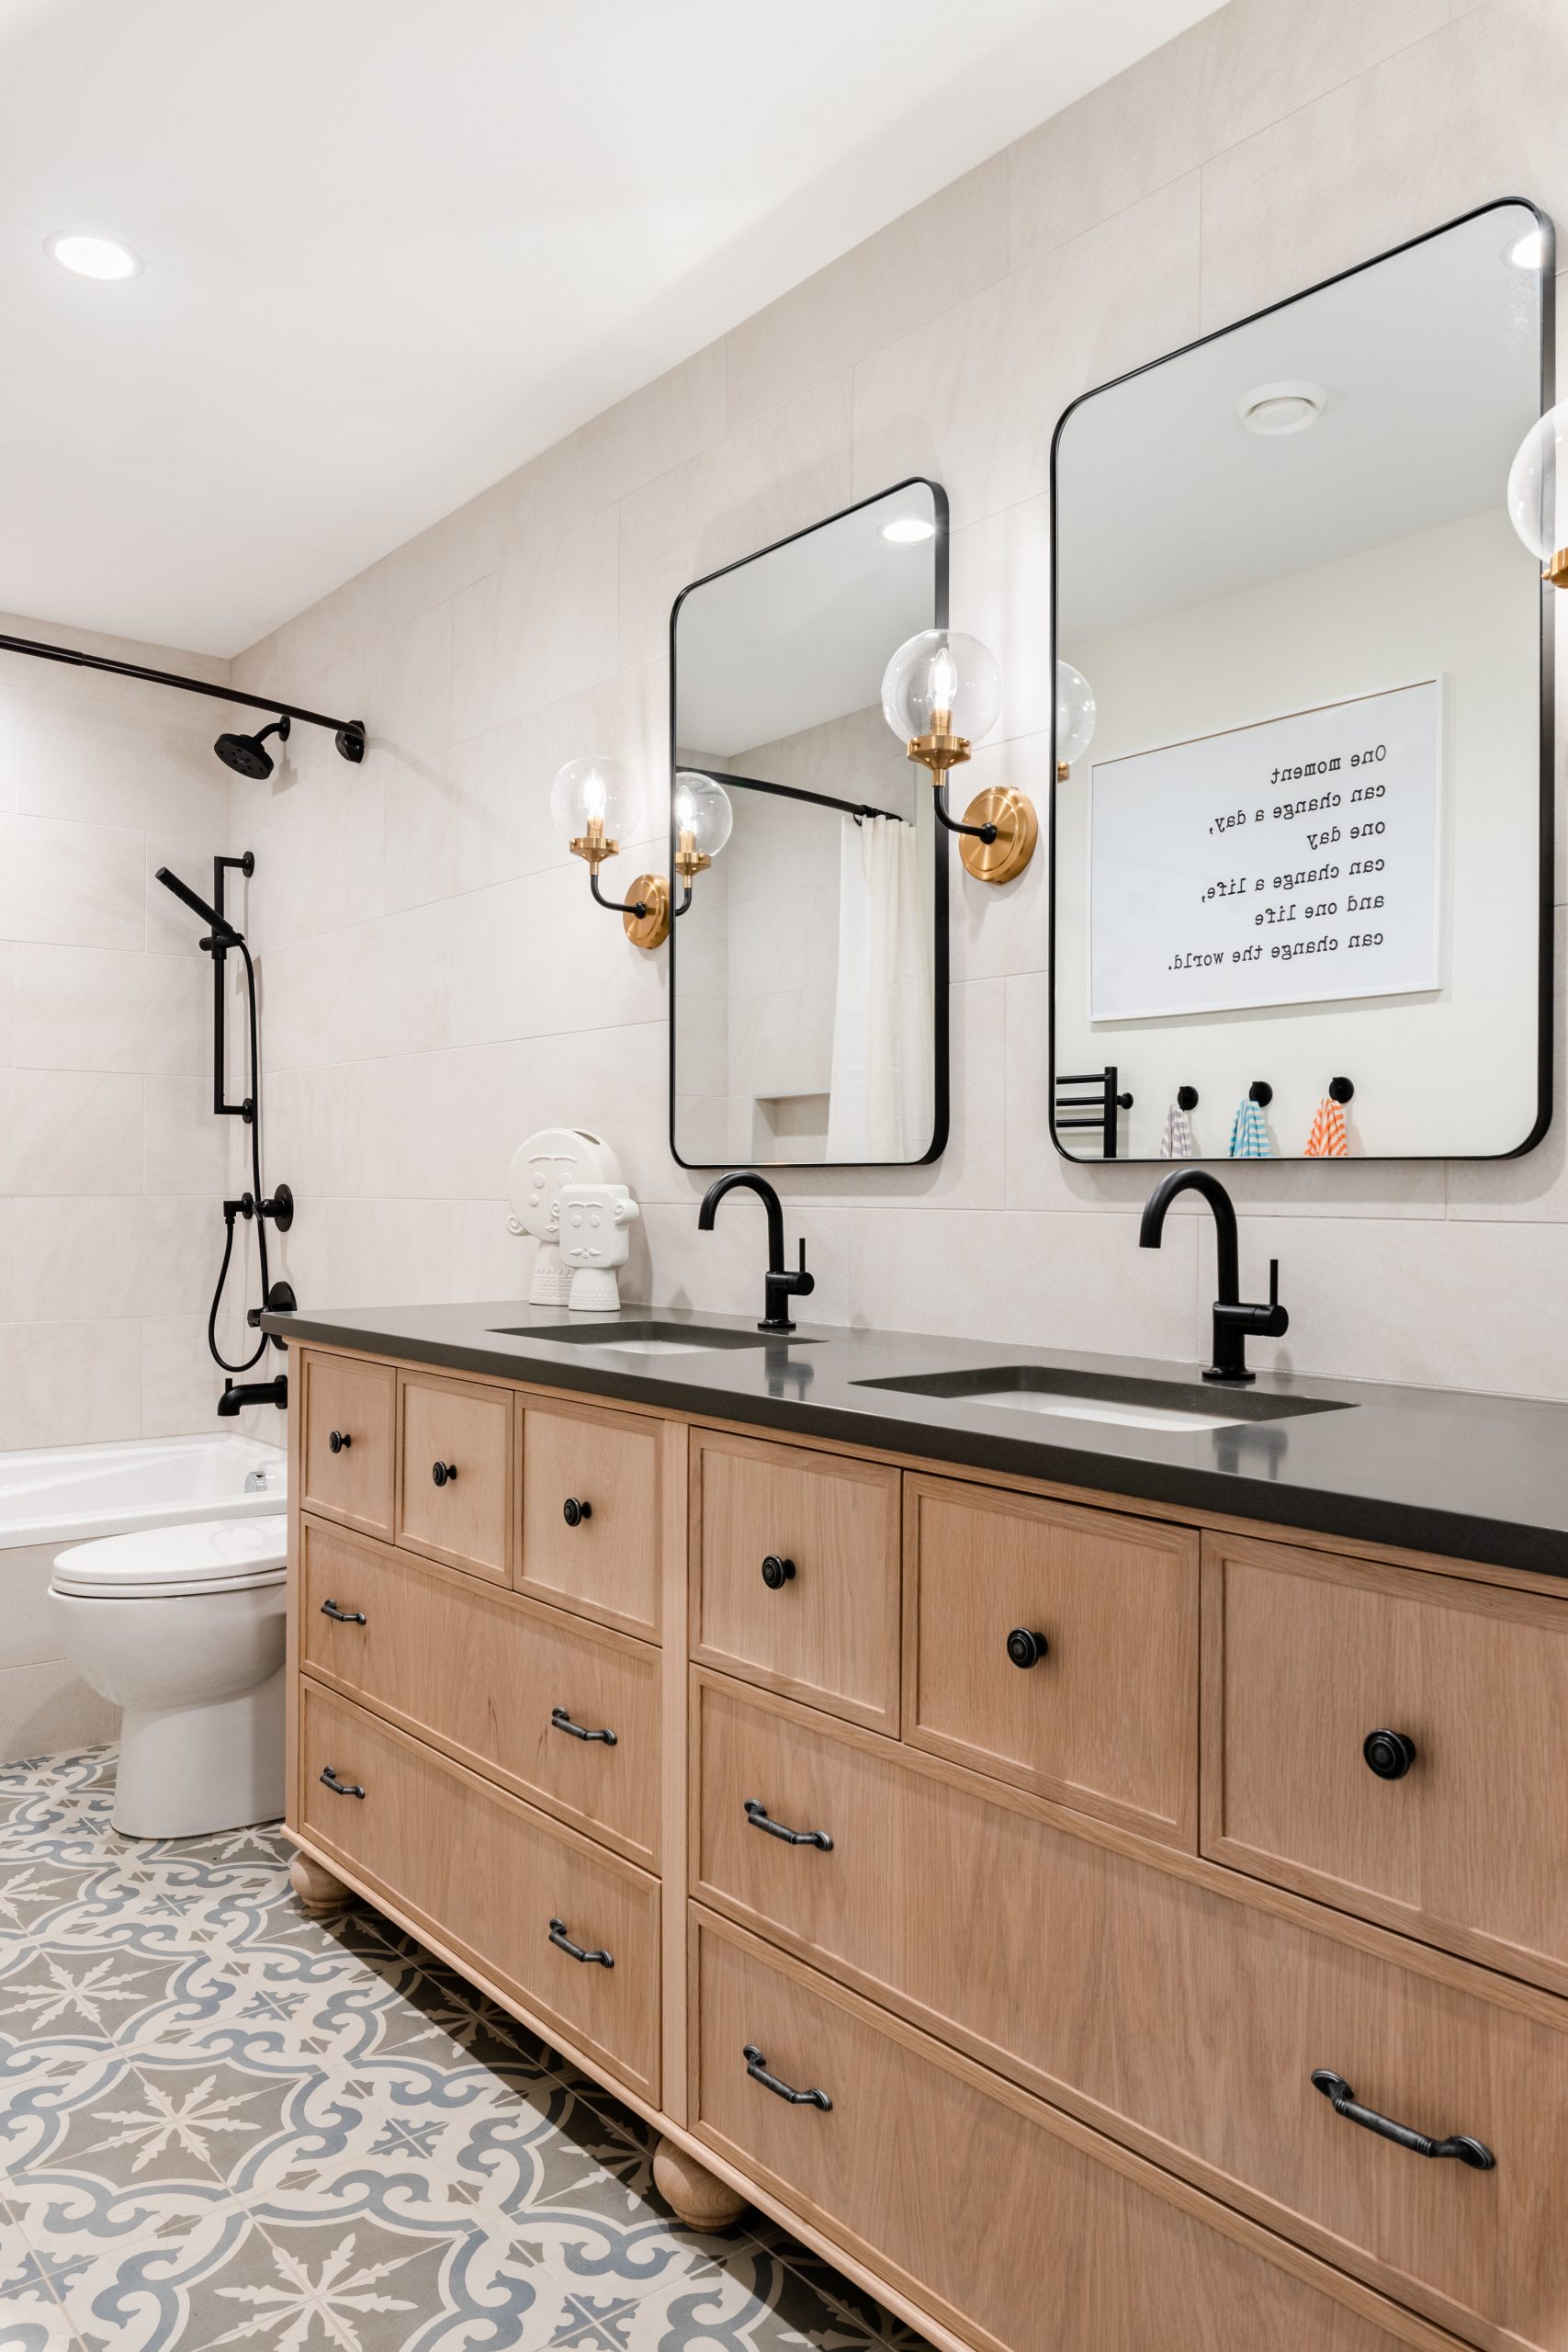 The children’s bathroom is divided so that everything is easily accessible and convenient. Built-in sinks allow, among other things, easier access for kids. The choice of different drawer shapes brings a dimension length to the cabinets.